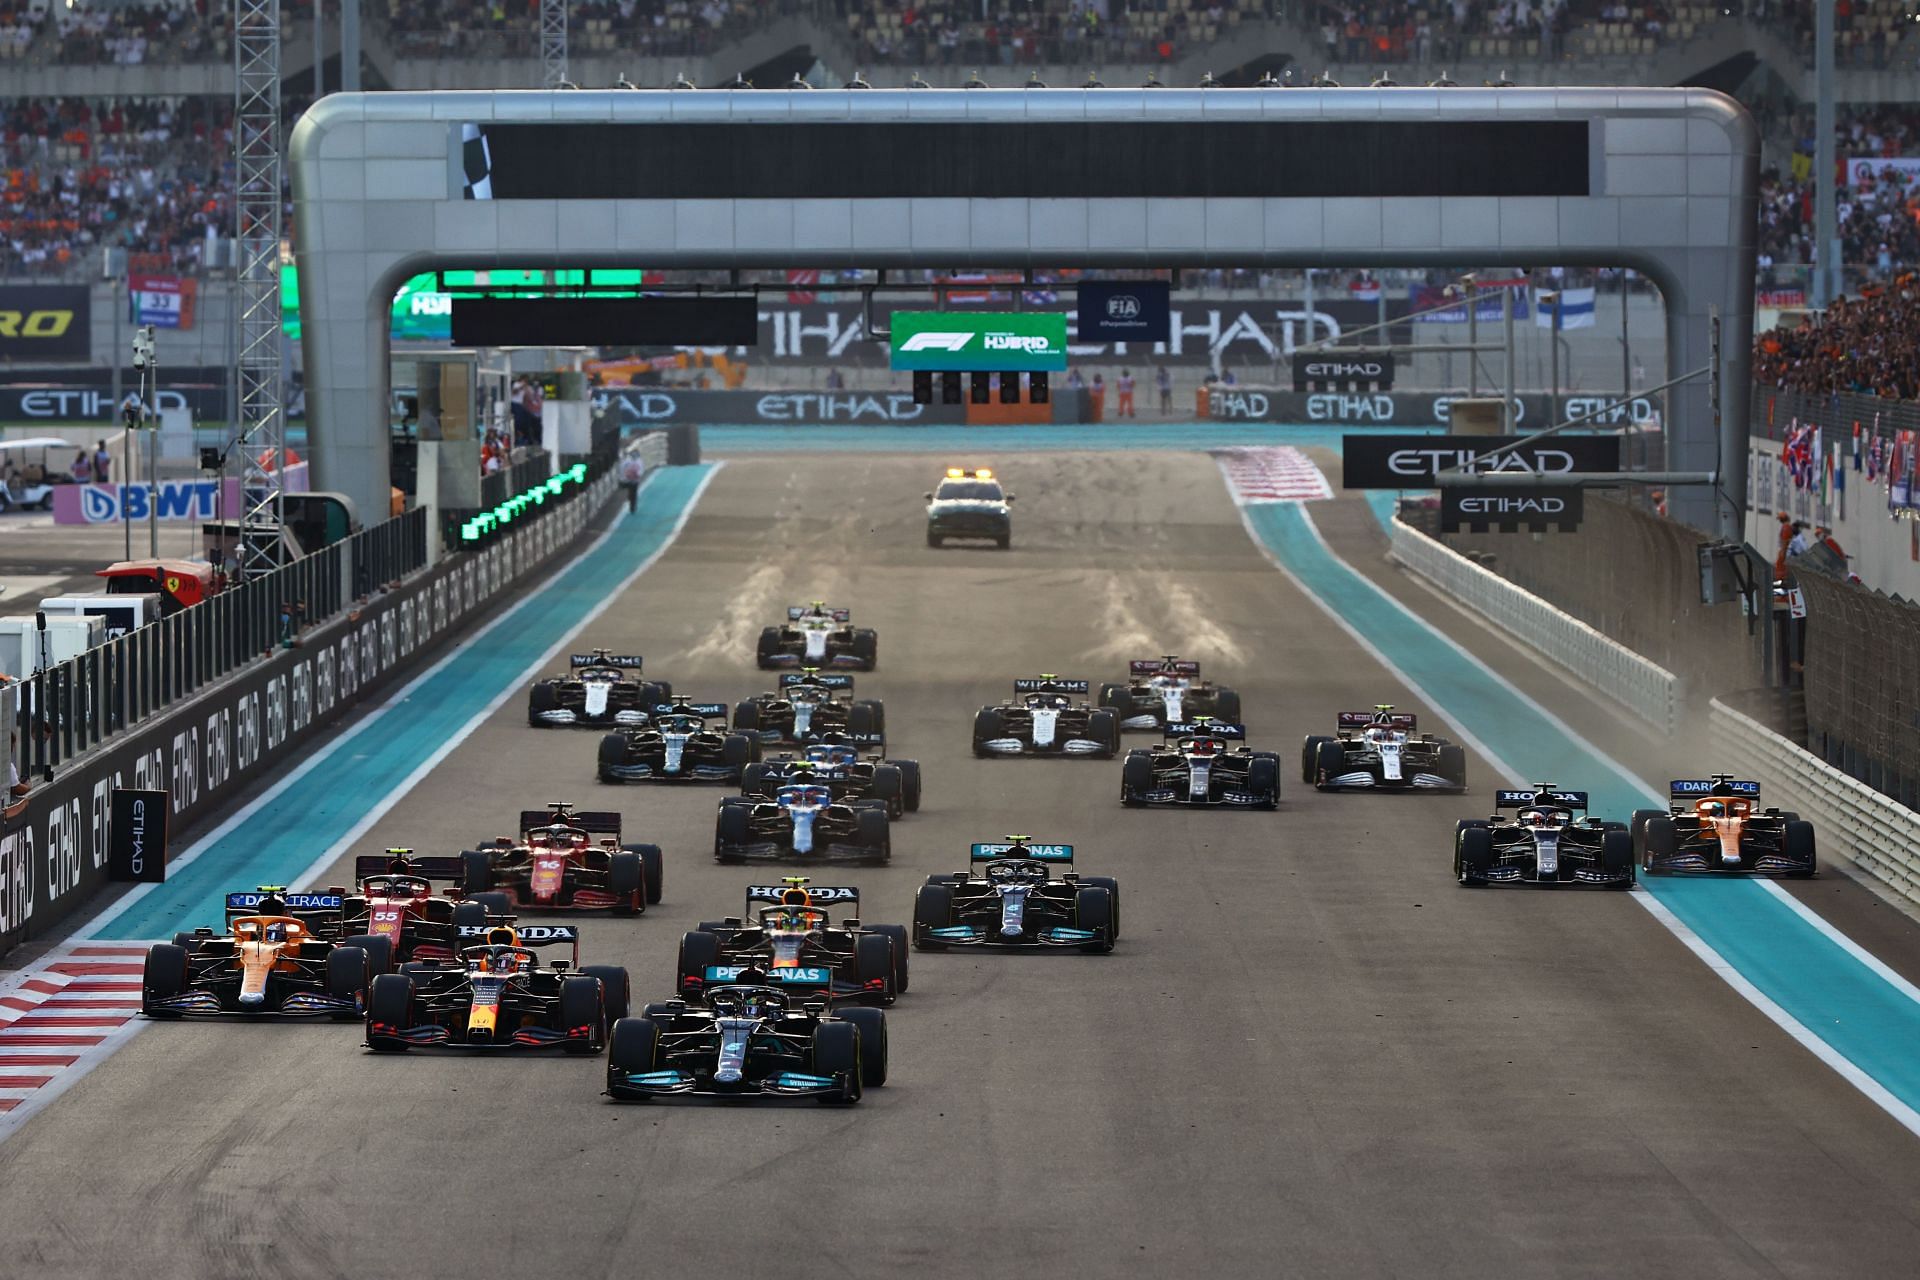 The events of the 2021 Abu Dhabi Grand Prix papered over some of the other dubious rules that need a rethink